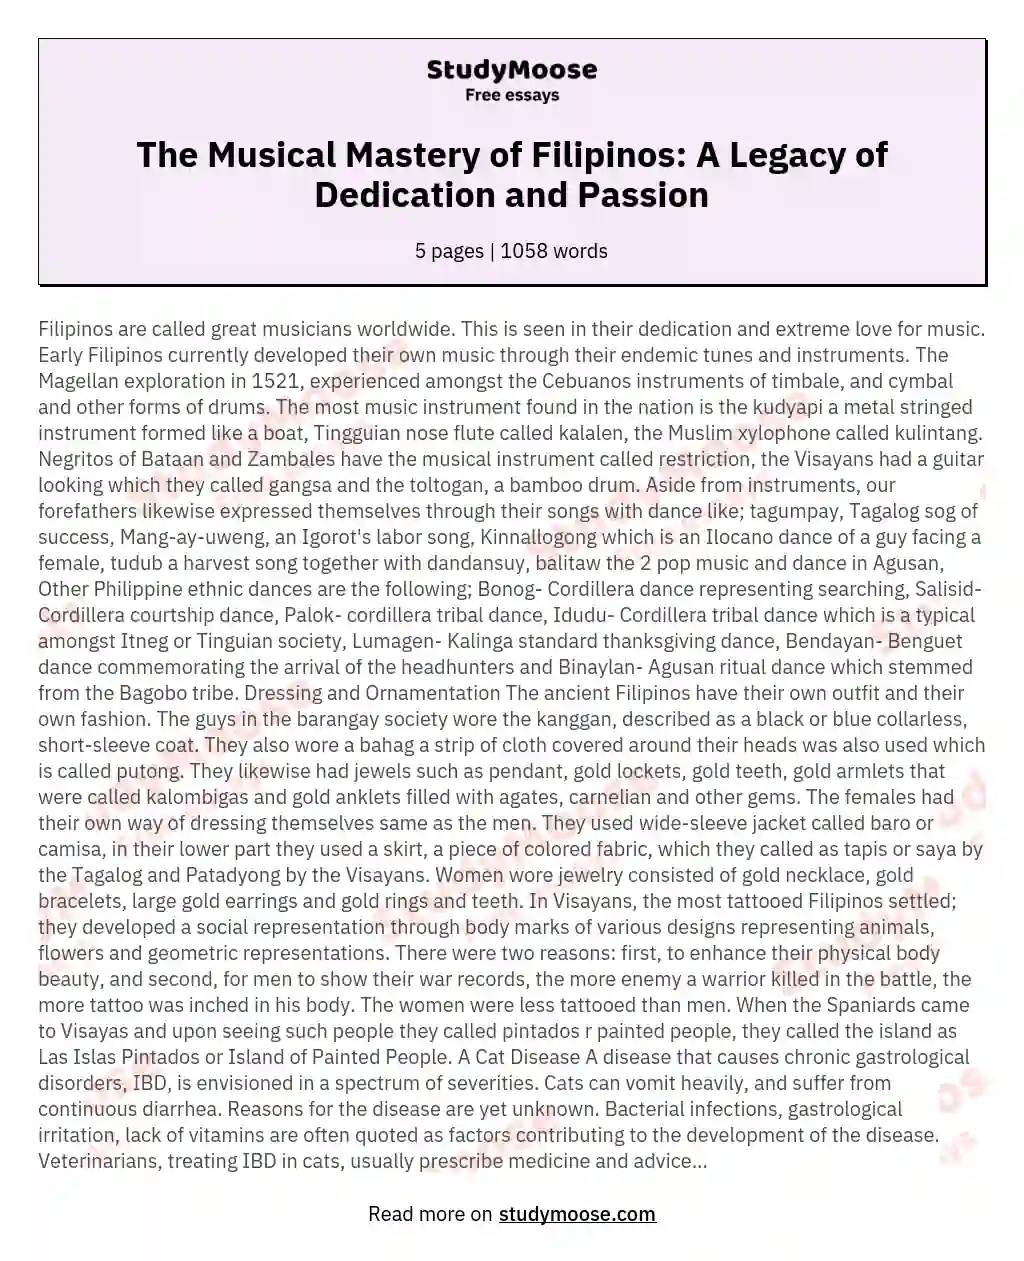 The Musical Mastery of Filipinos: A Legacy of Dedication and Passion essay